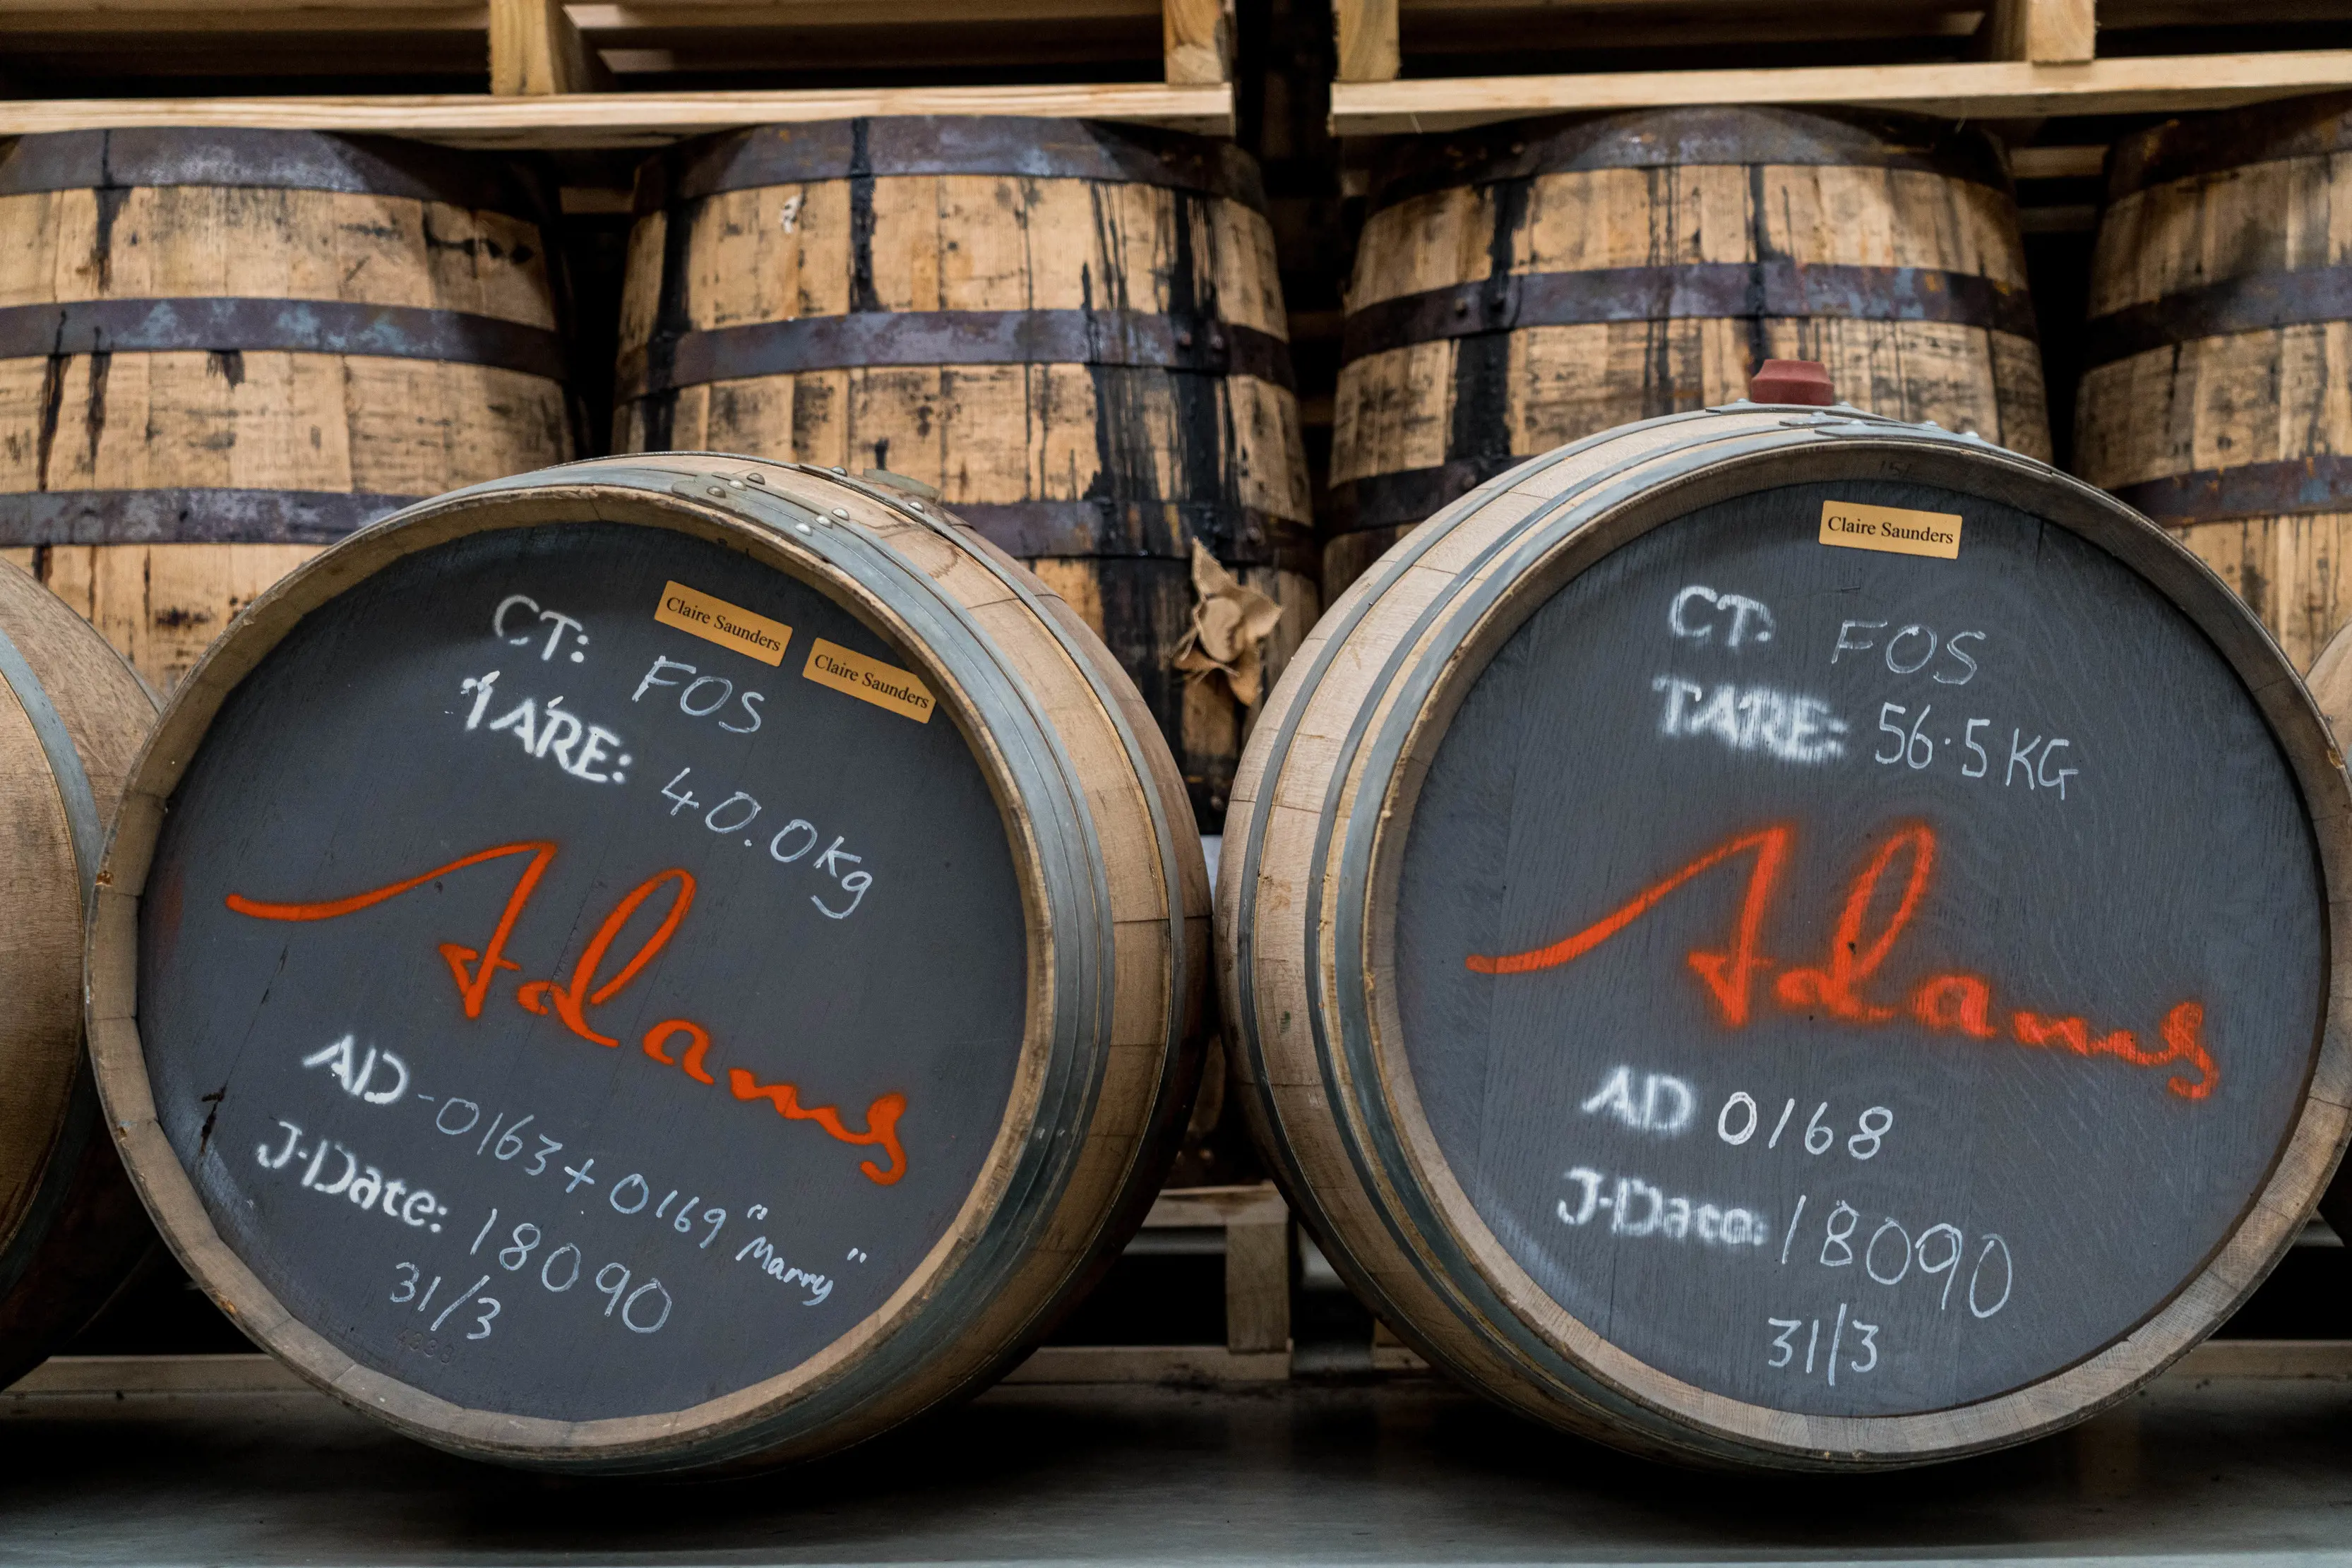 Two whisky barrels in the centre of the image with a stack of barrels in the background for Adams Distillery